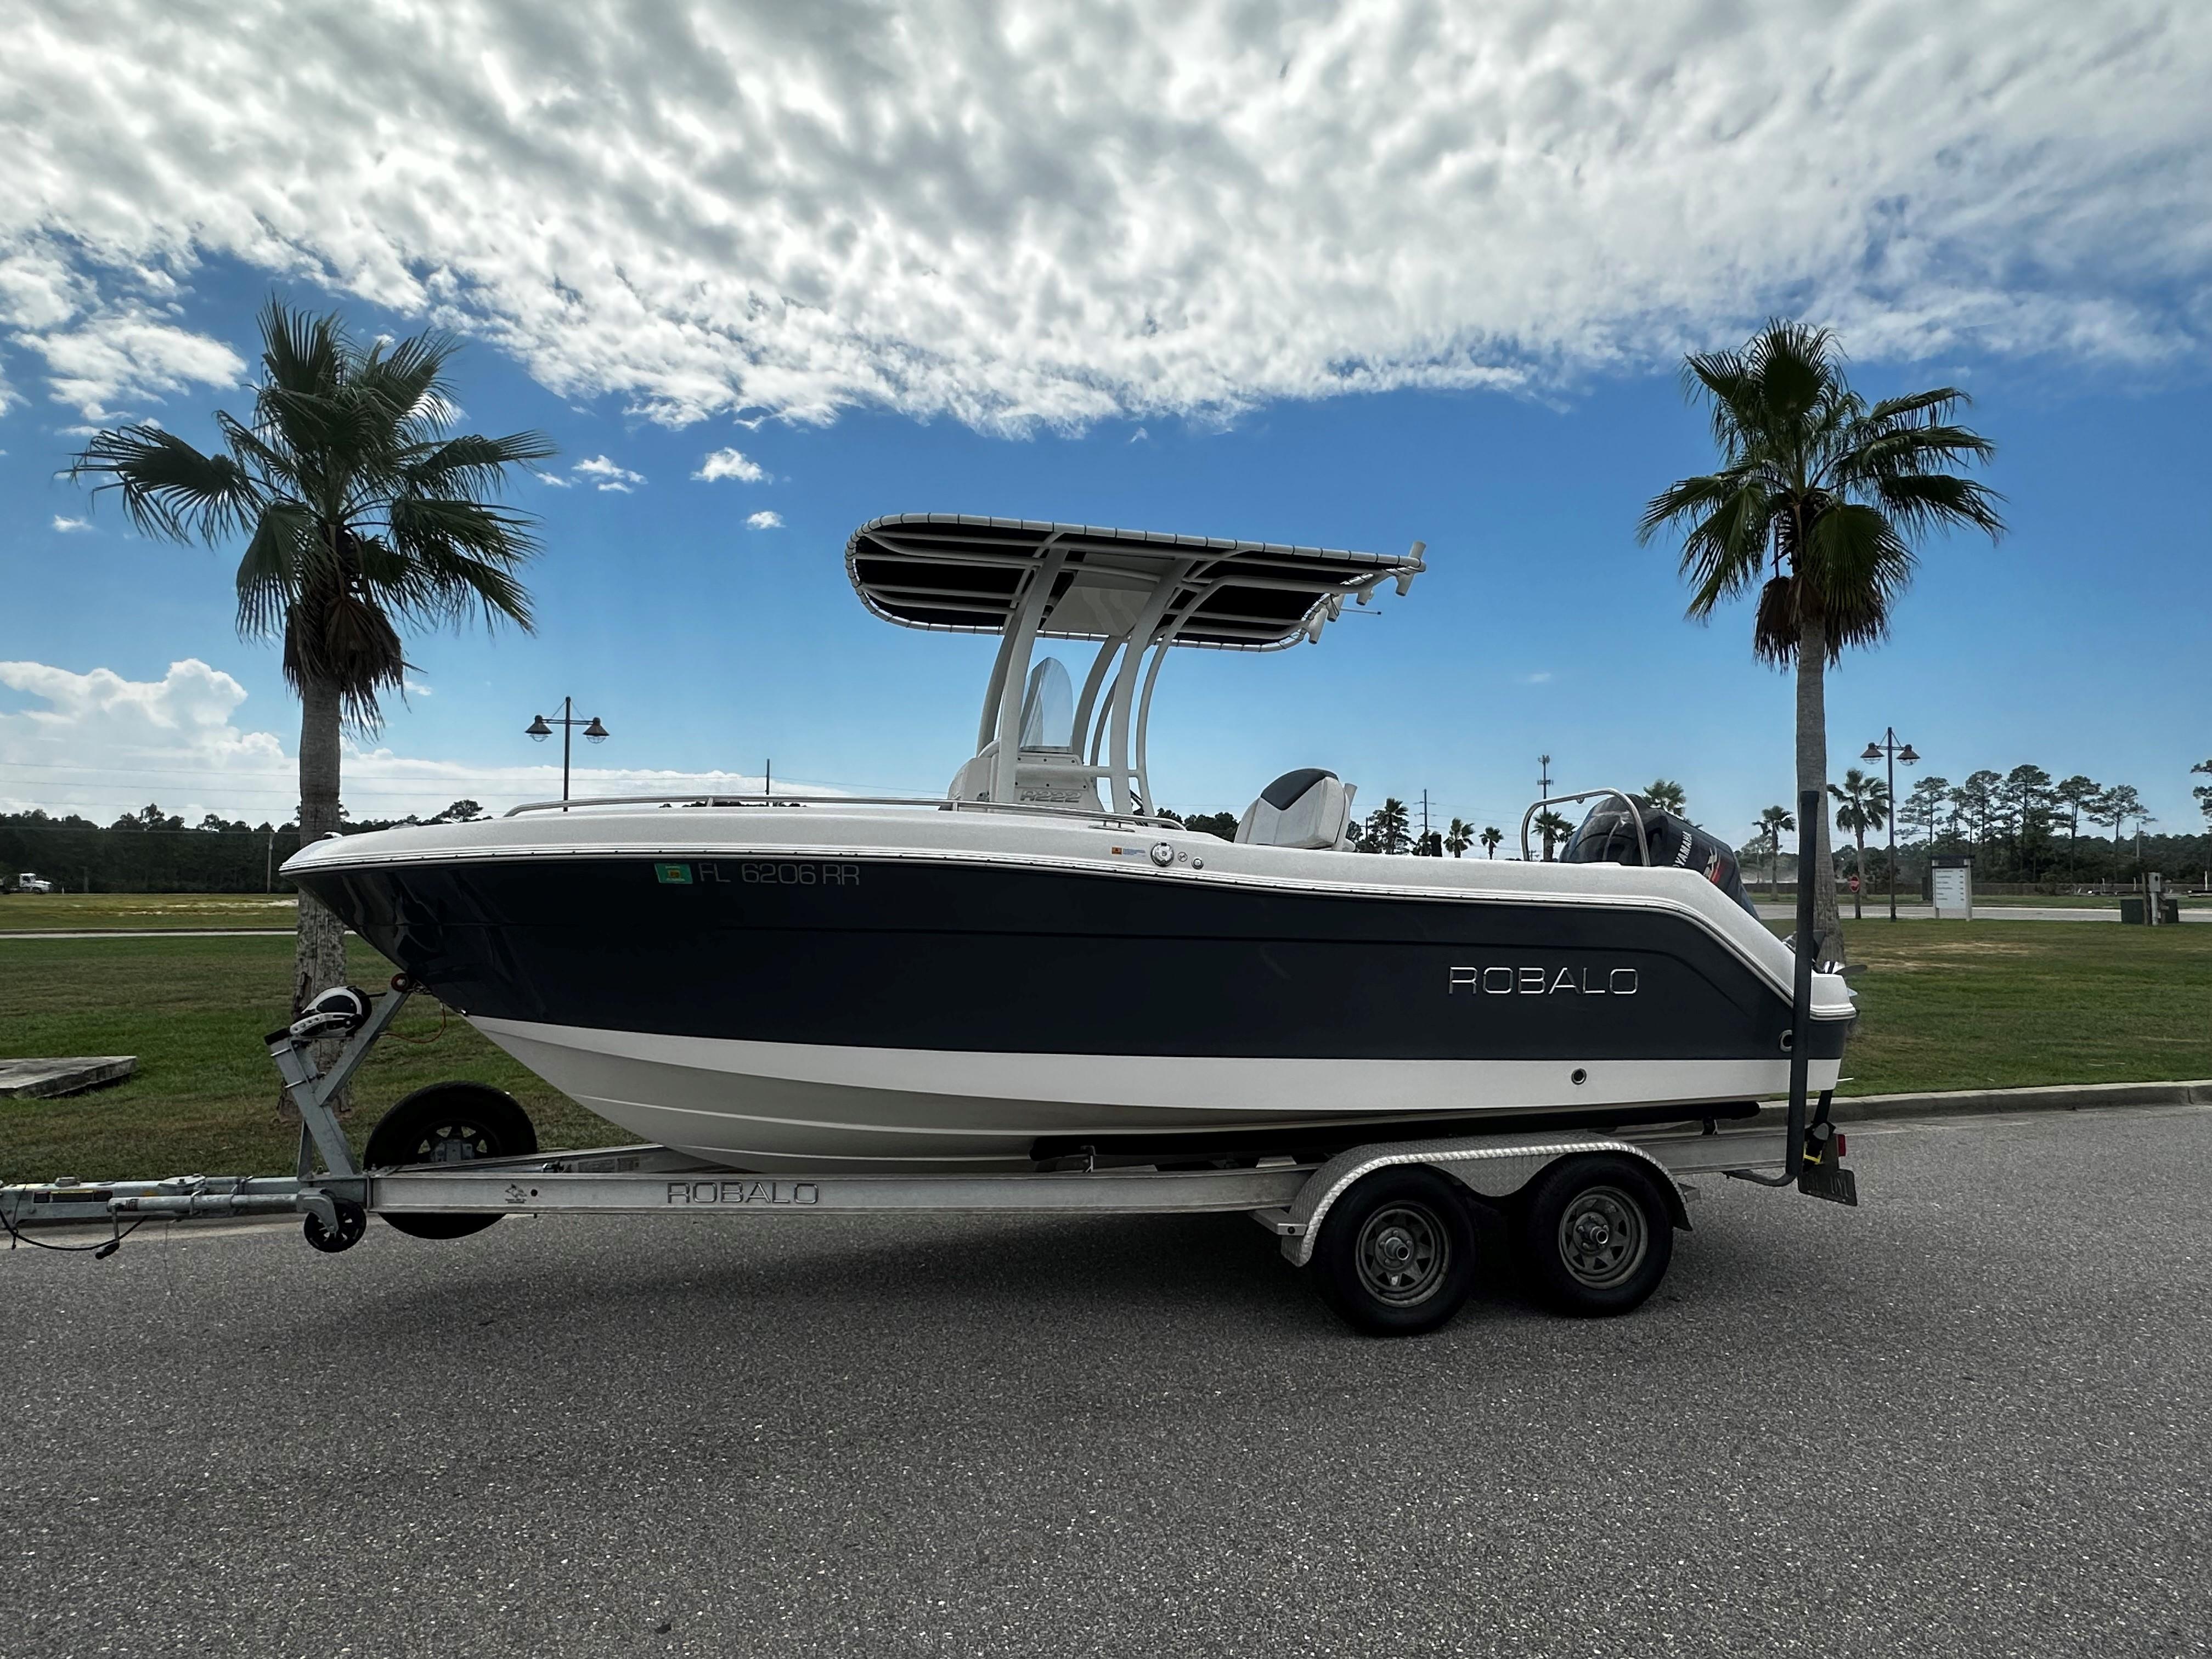 Robalo R222 boats for sale